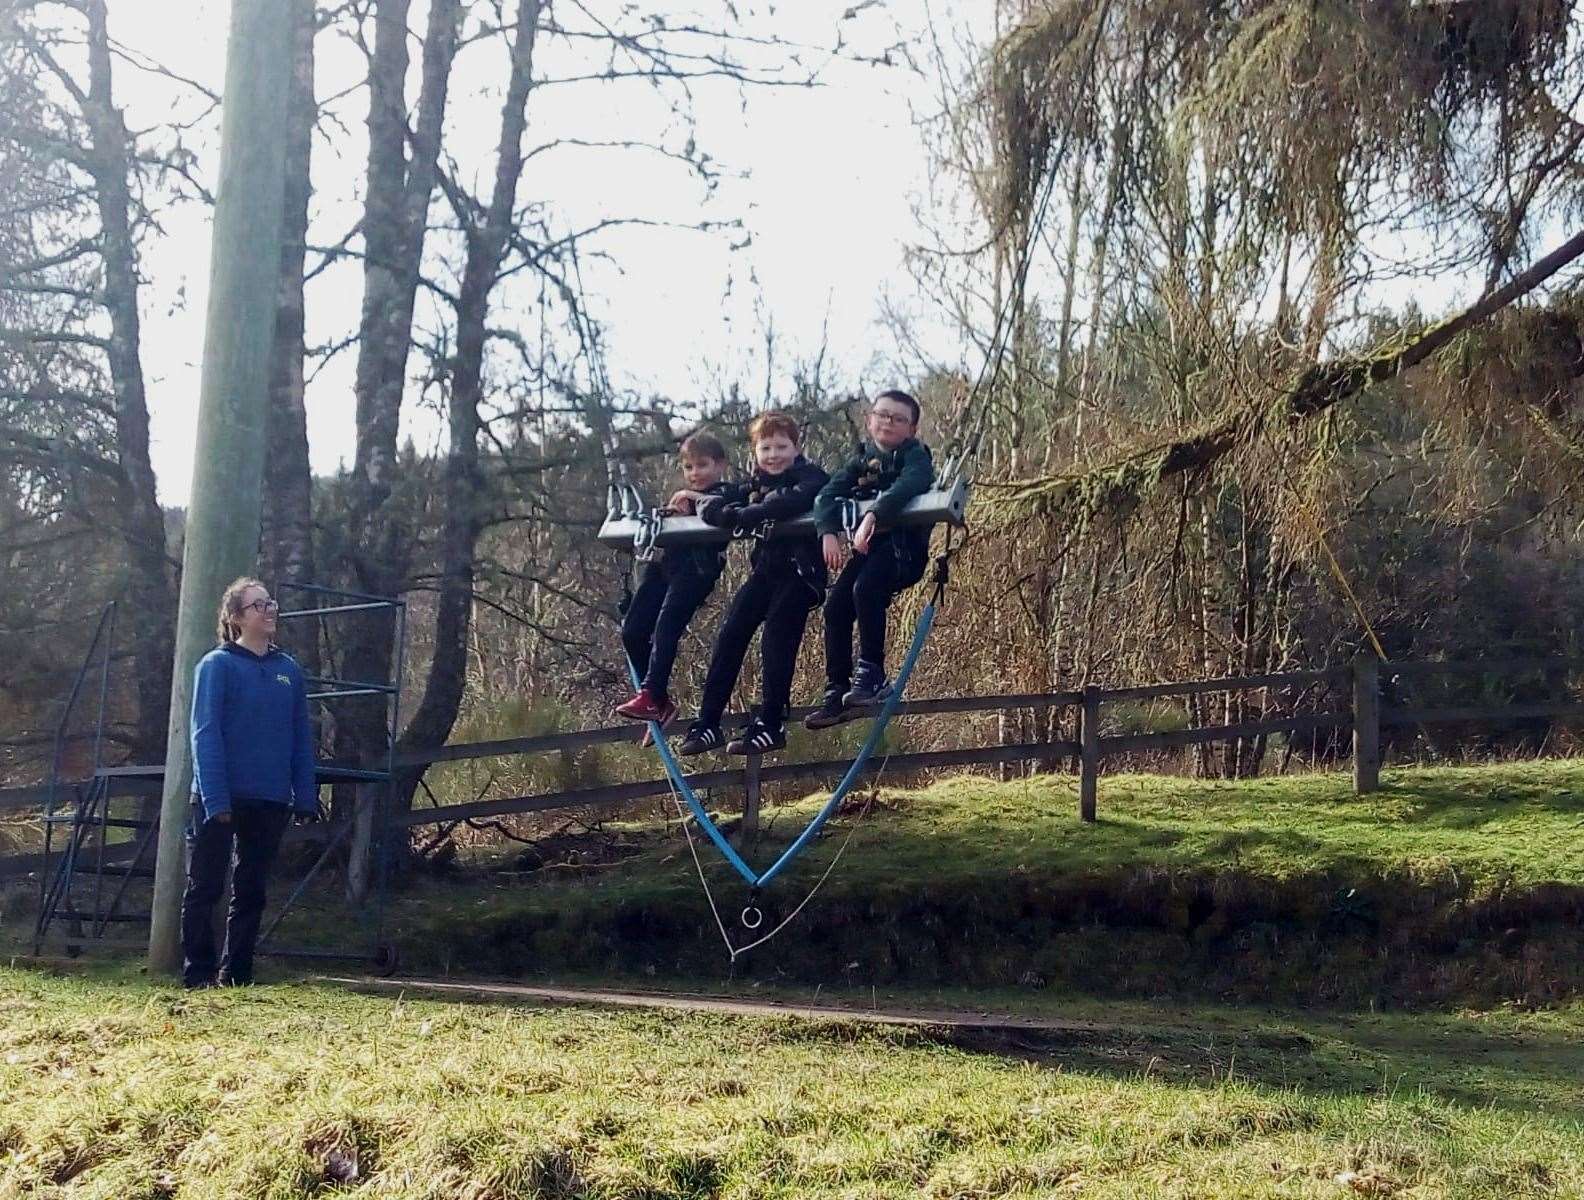 Rhys McBeath, Shay Macdonald and Owen Harding trying out the giant swing.